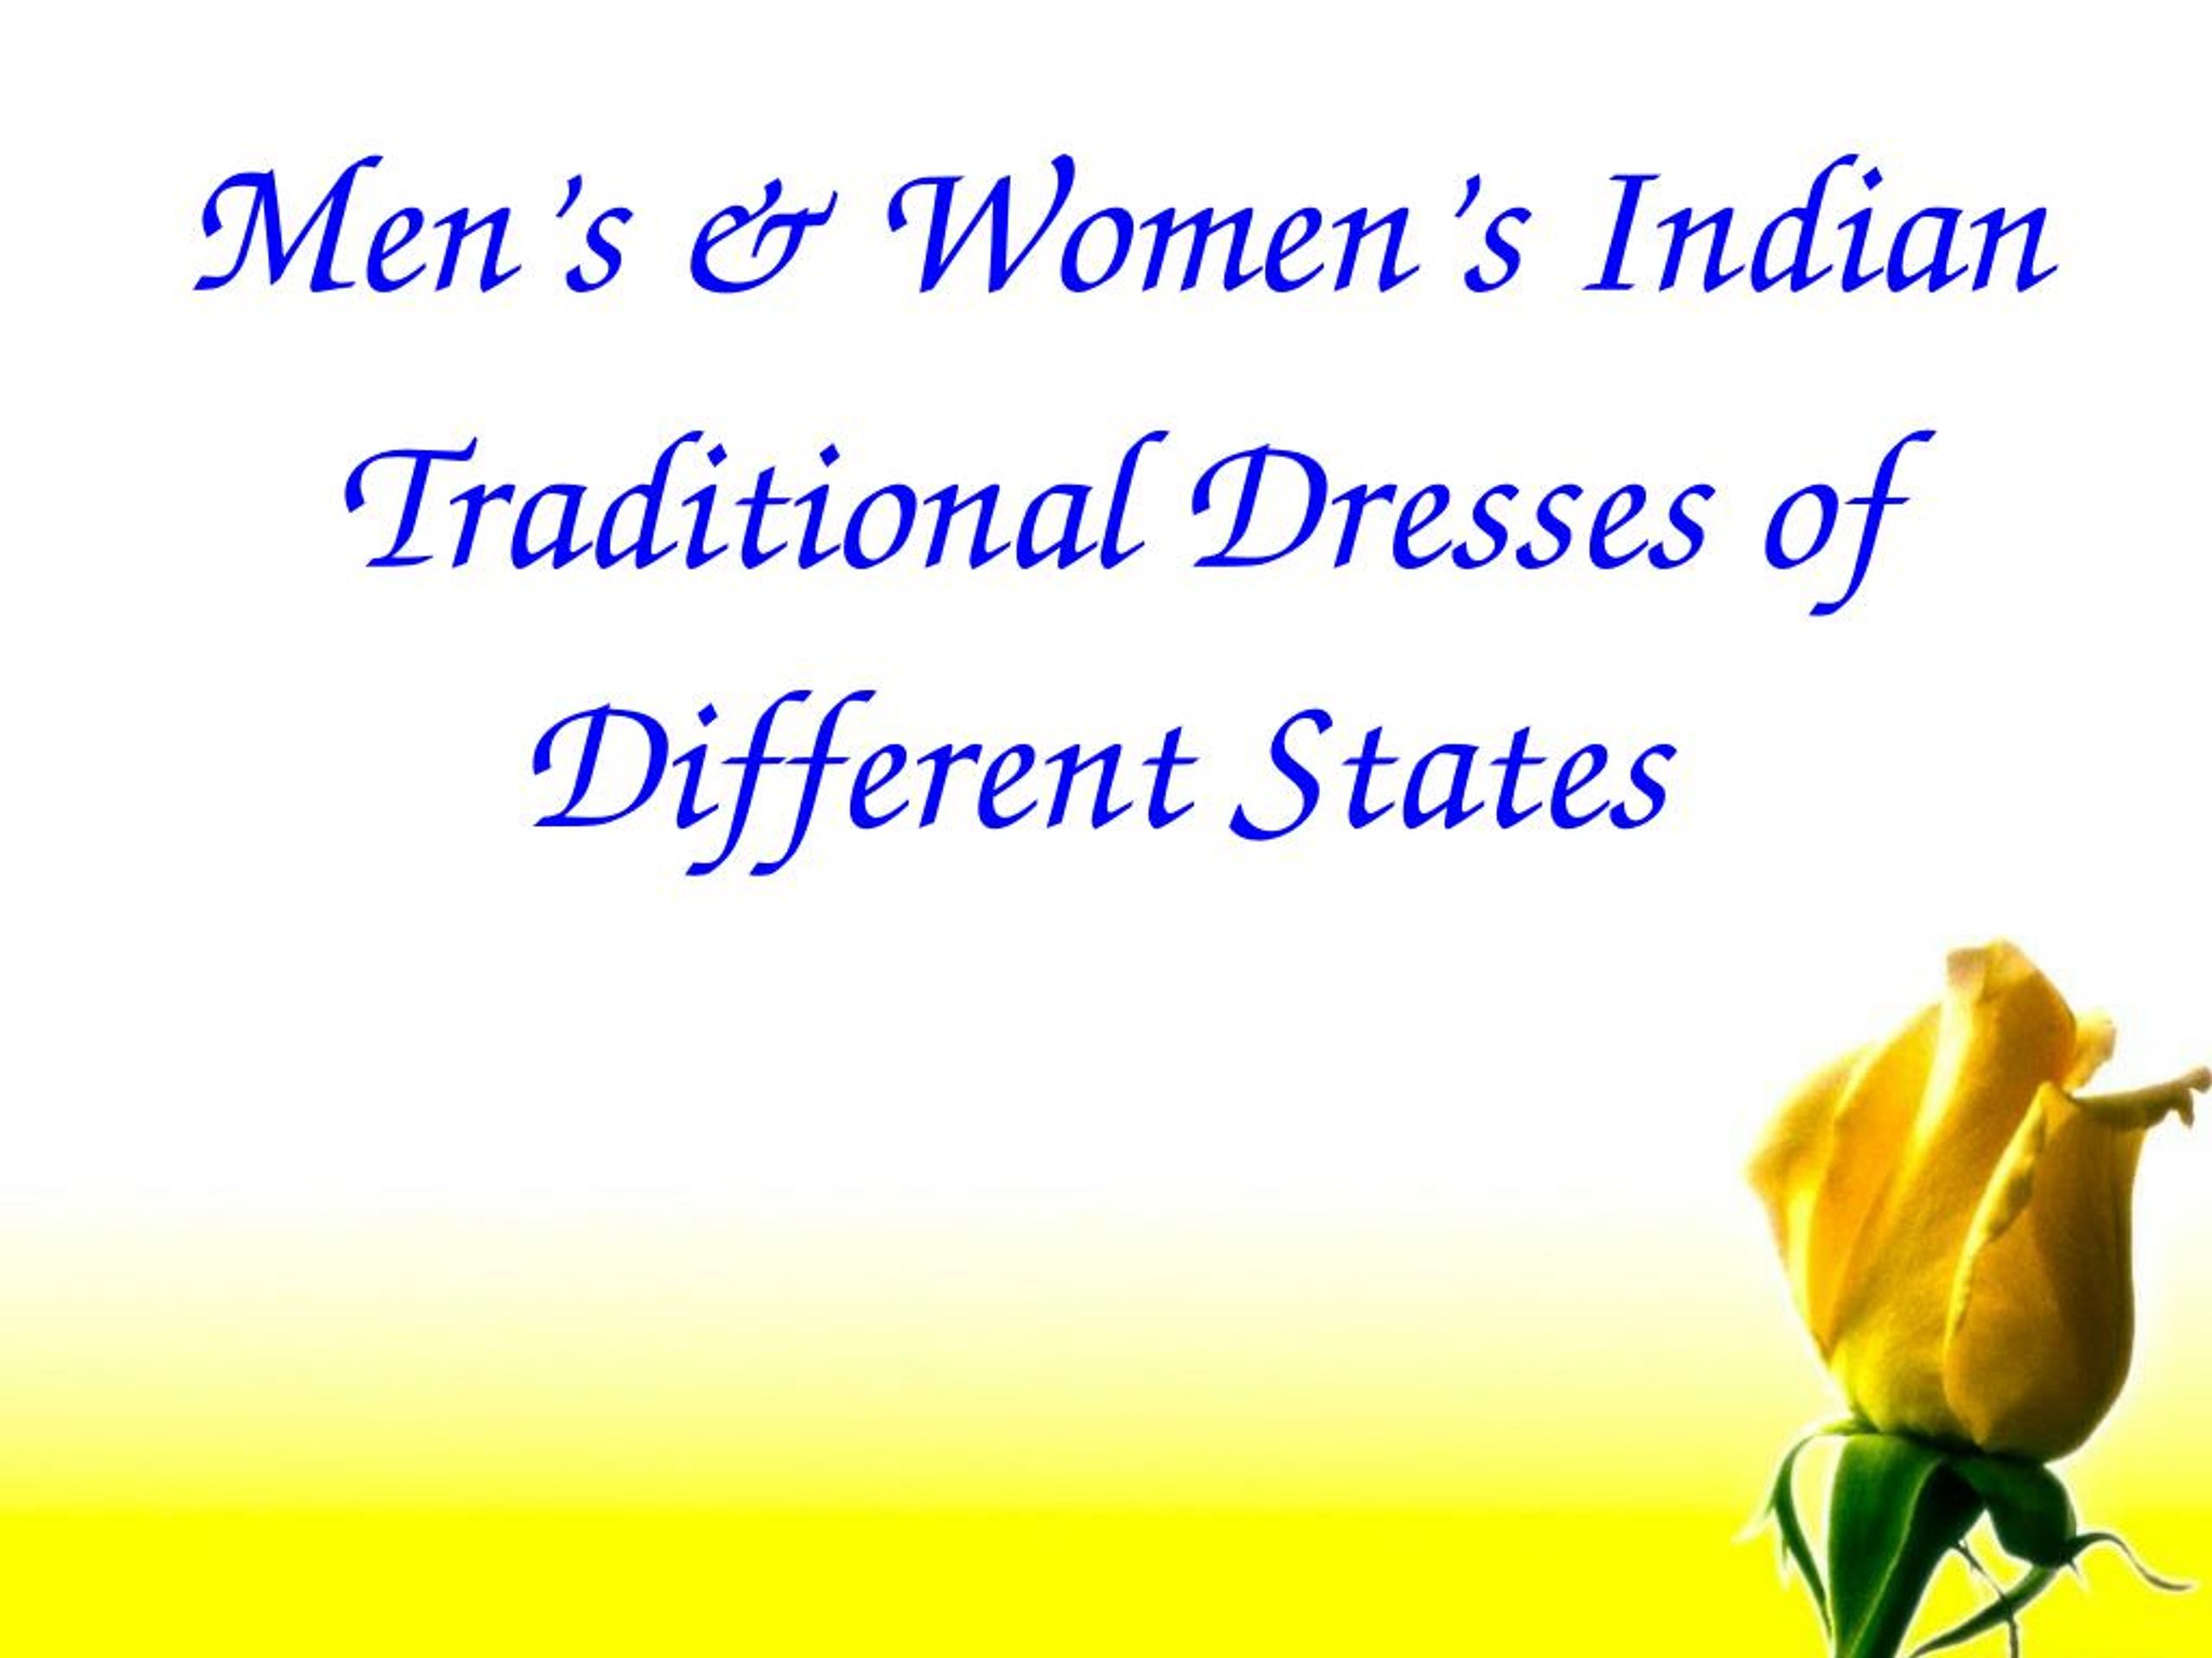 PPT - Indian Traditional Dresses of Men & Women PowerPoint Presentation ...